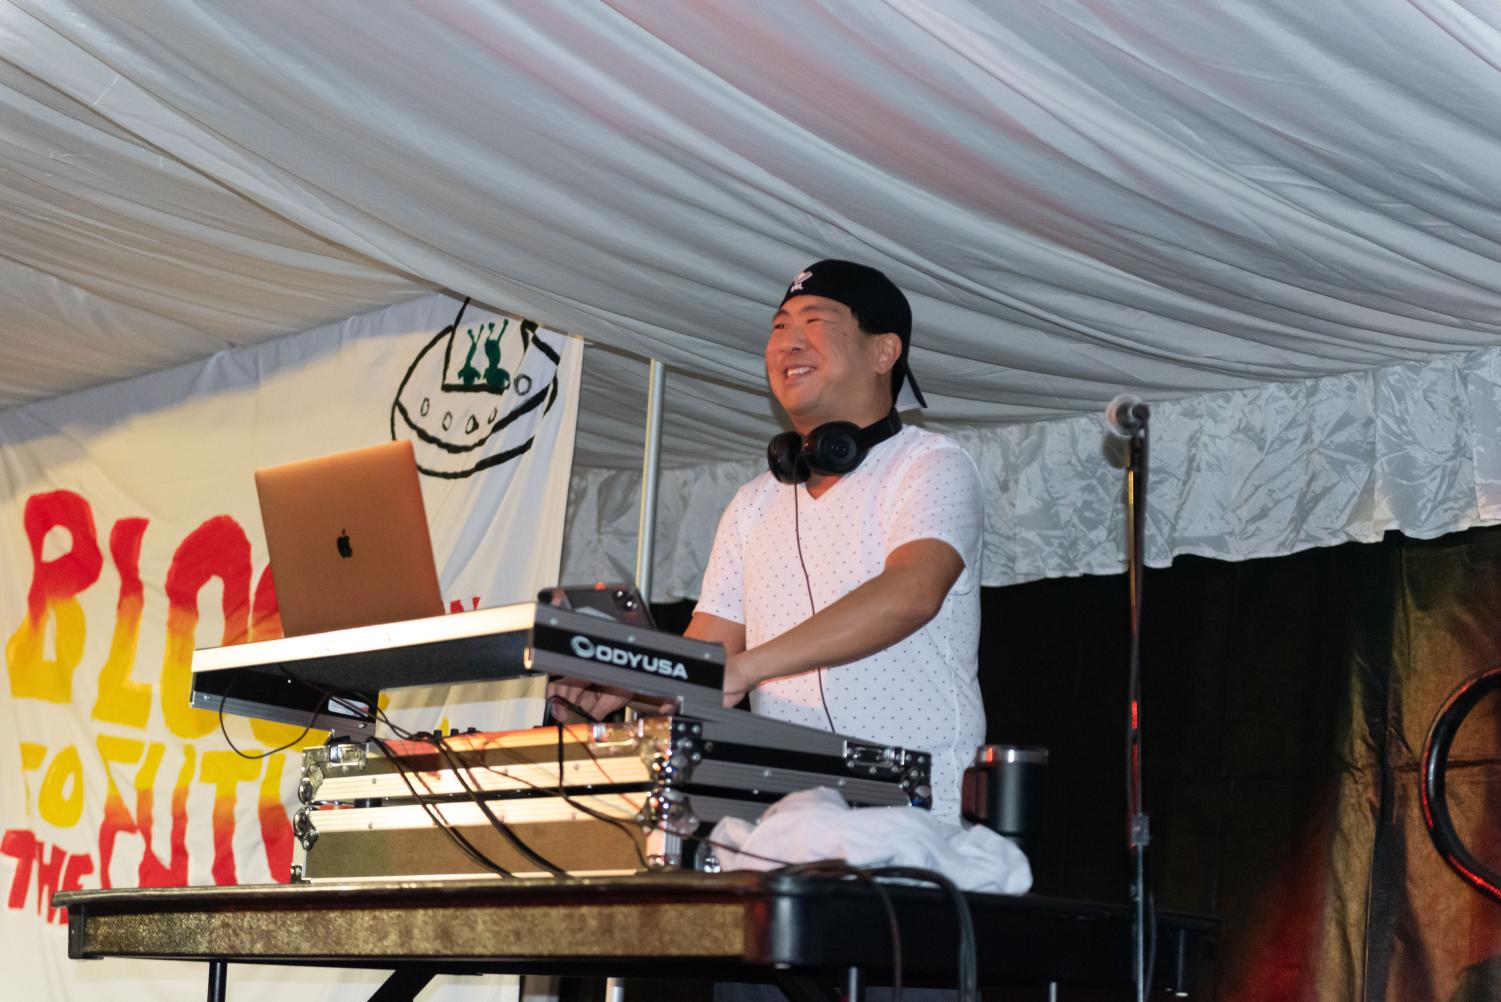 A DJ behind a laptop stands in front of a banner saying “Block to the Future.”